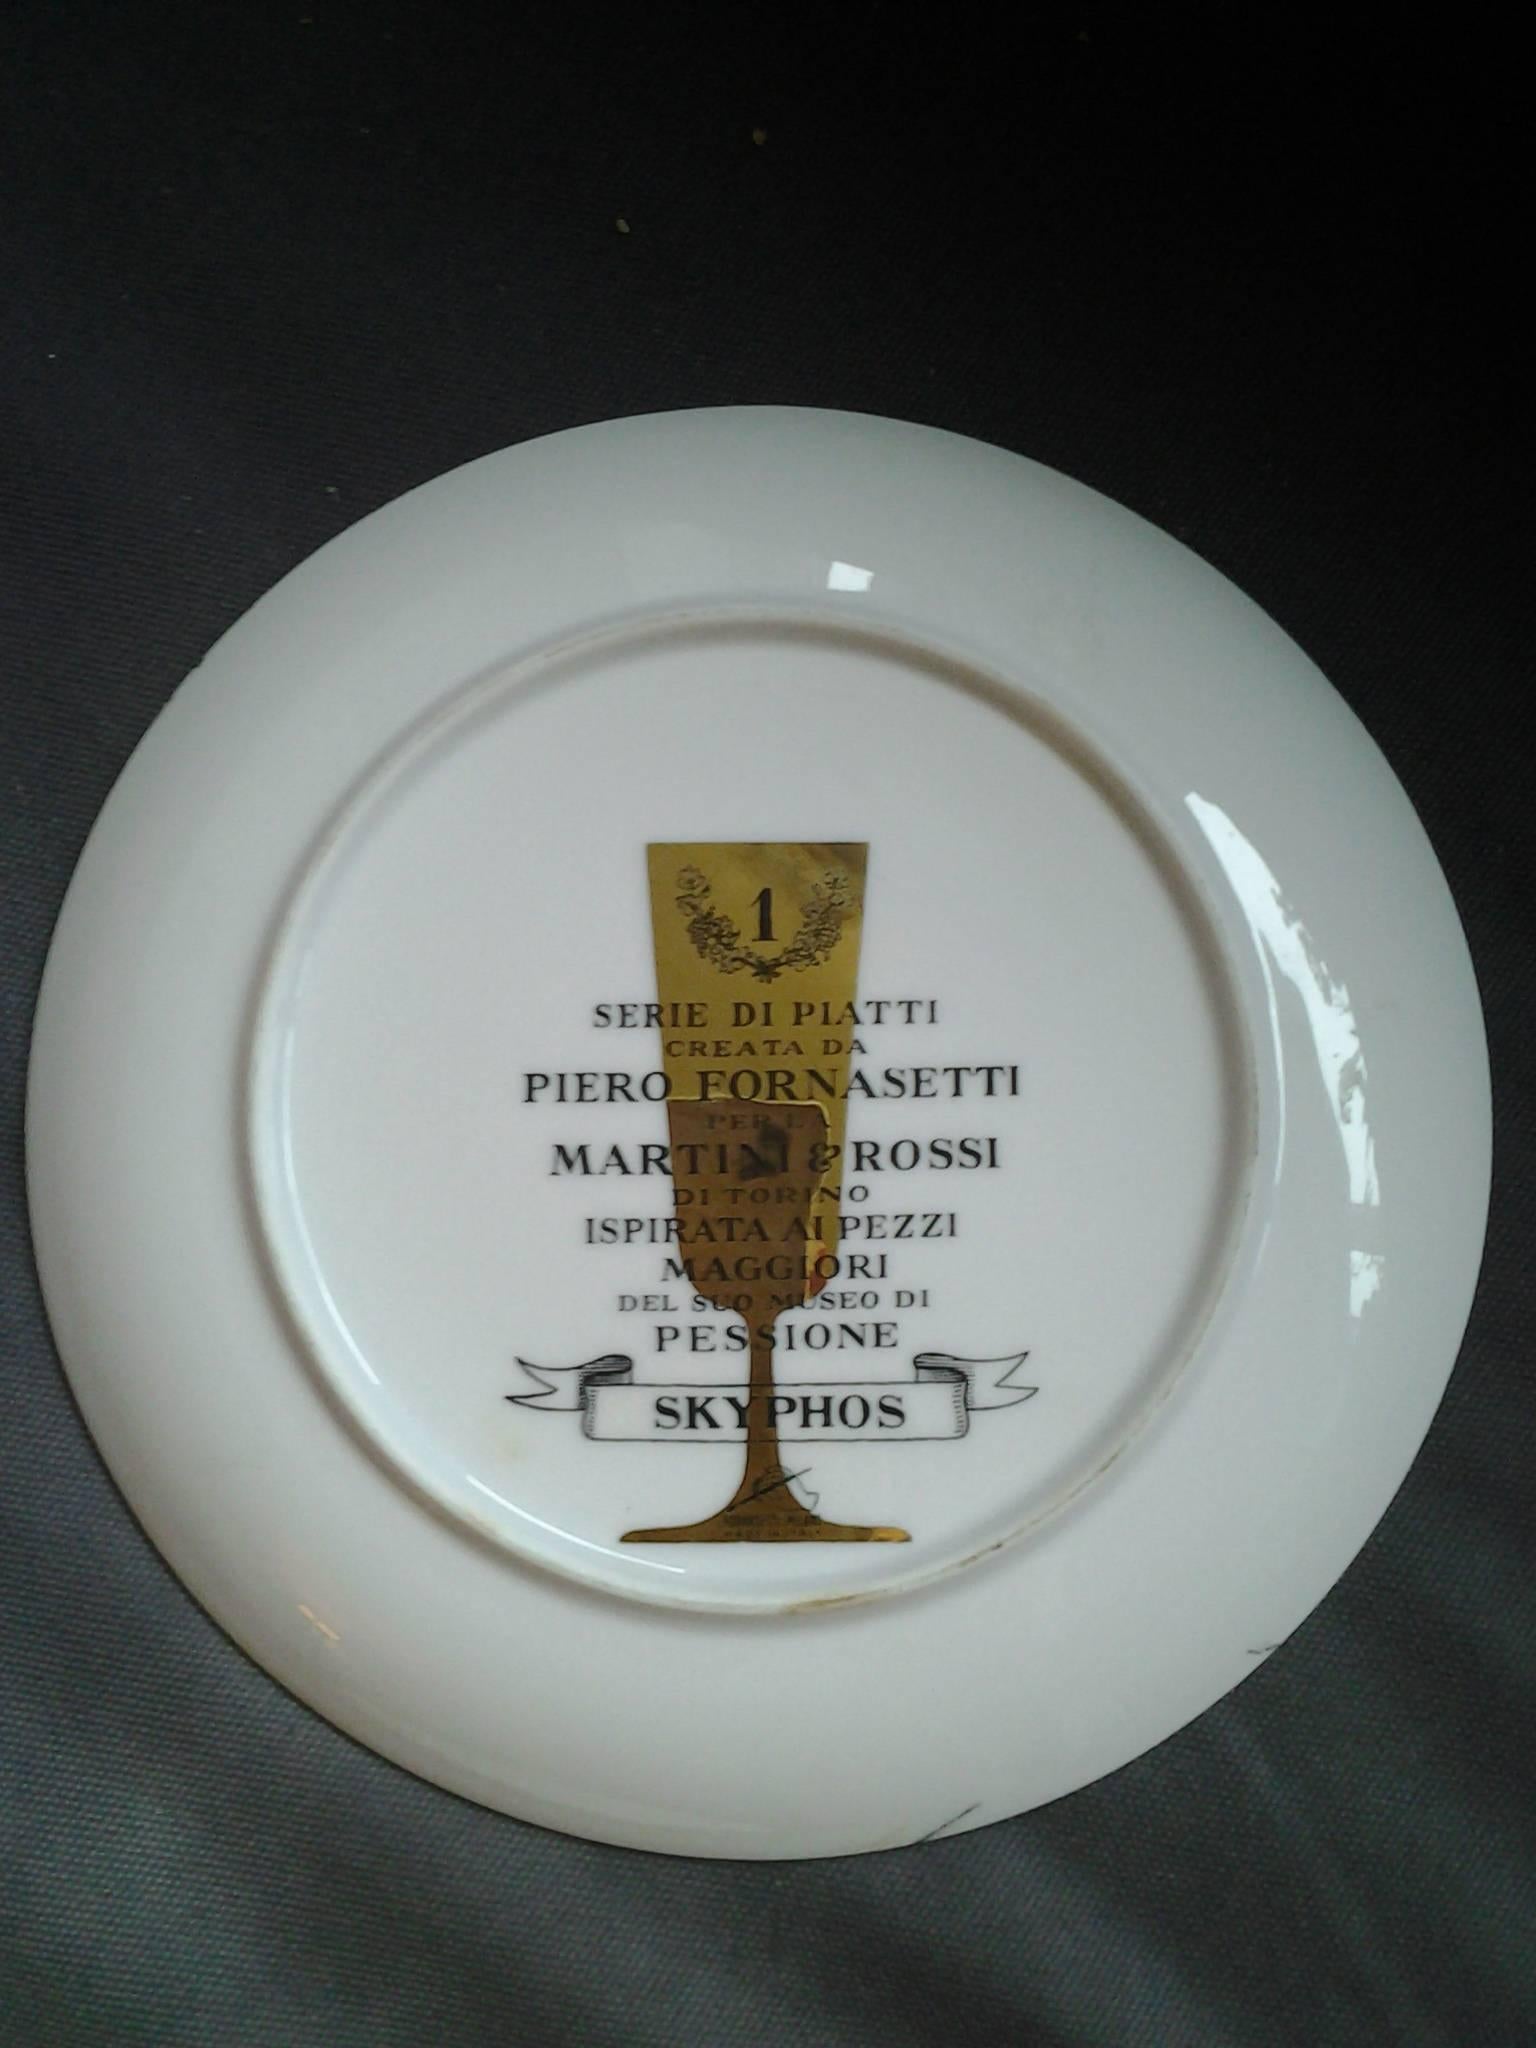 Piero Fornasetti (1913-1988). Four dishes in original box made in limited edition for Martini & Rossi with decor inspired pieces from Martini Museum.
Diameter 23.00 cm. 09.06 in.
Free shipping to London.
Document provided.